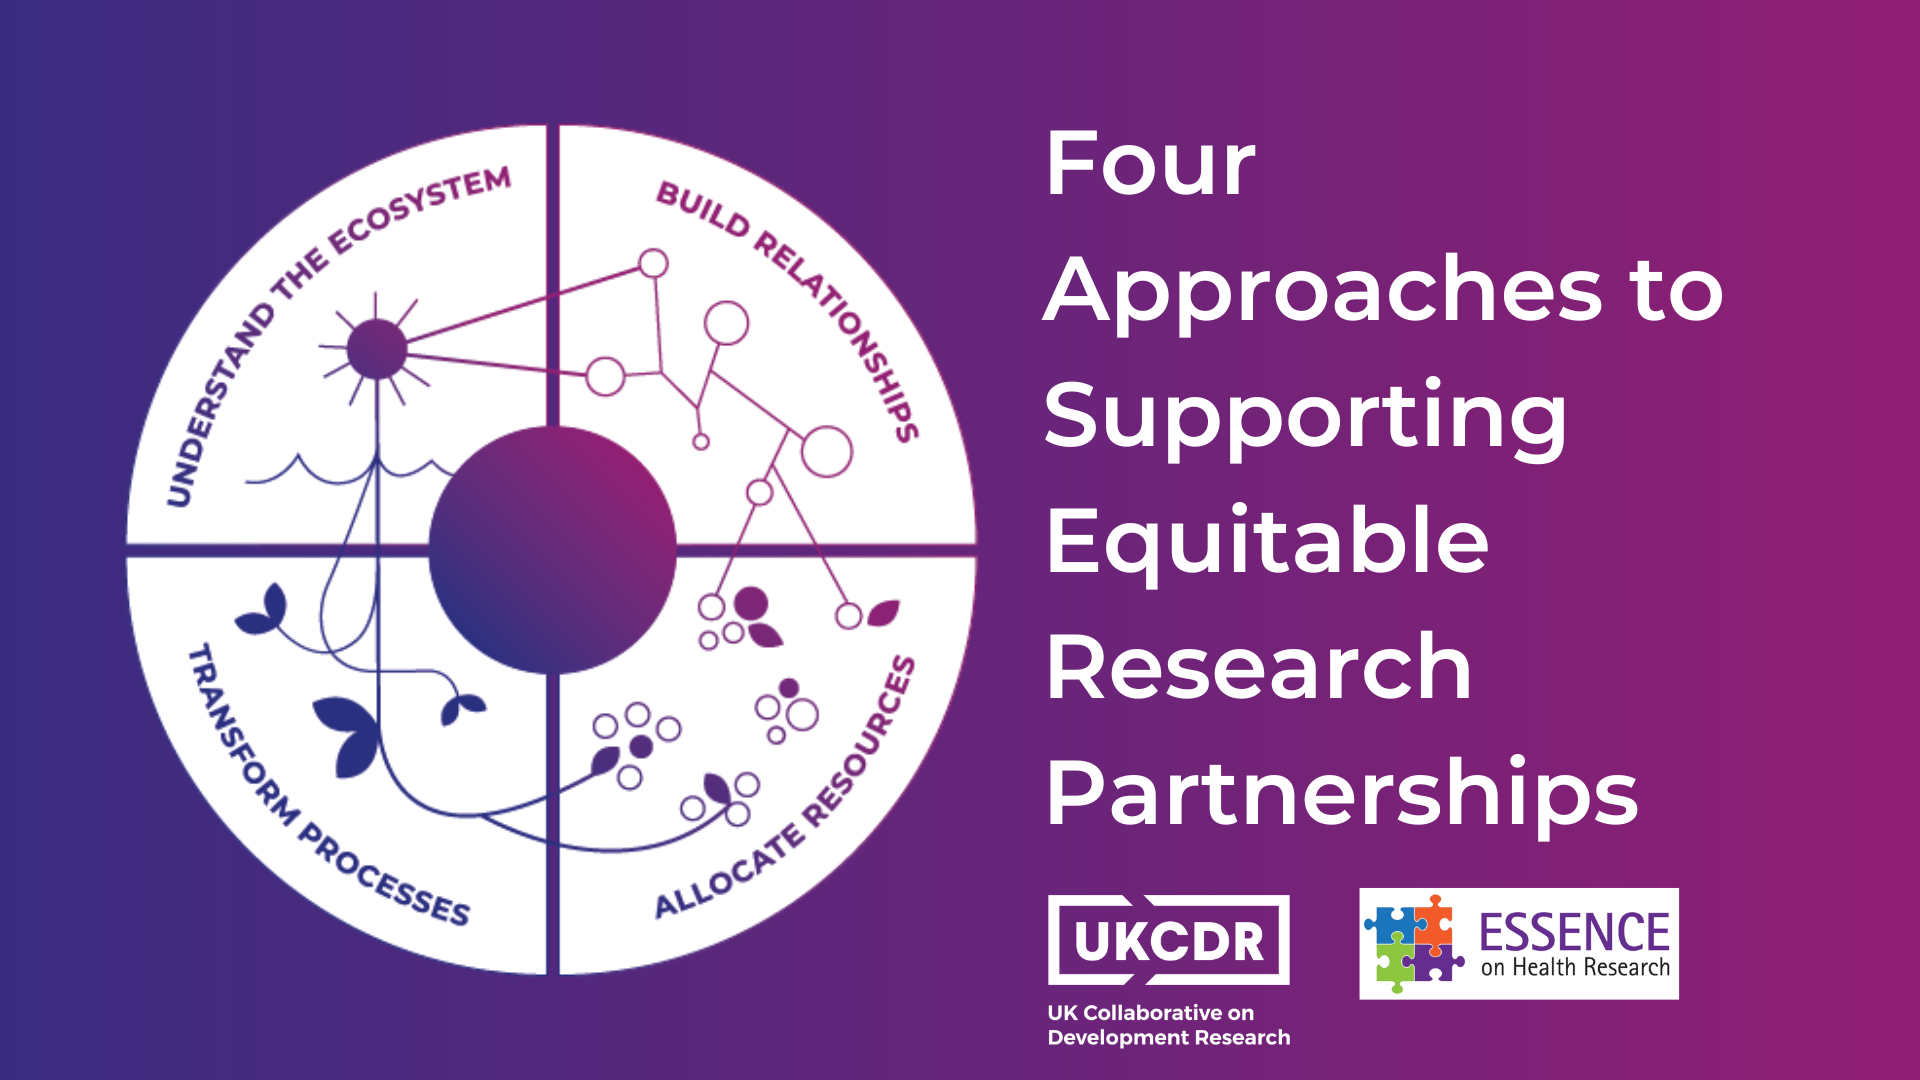 Four Approaches to Supporting Equitable Research Partnerships